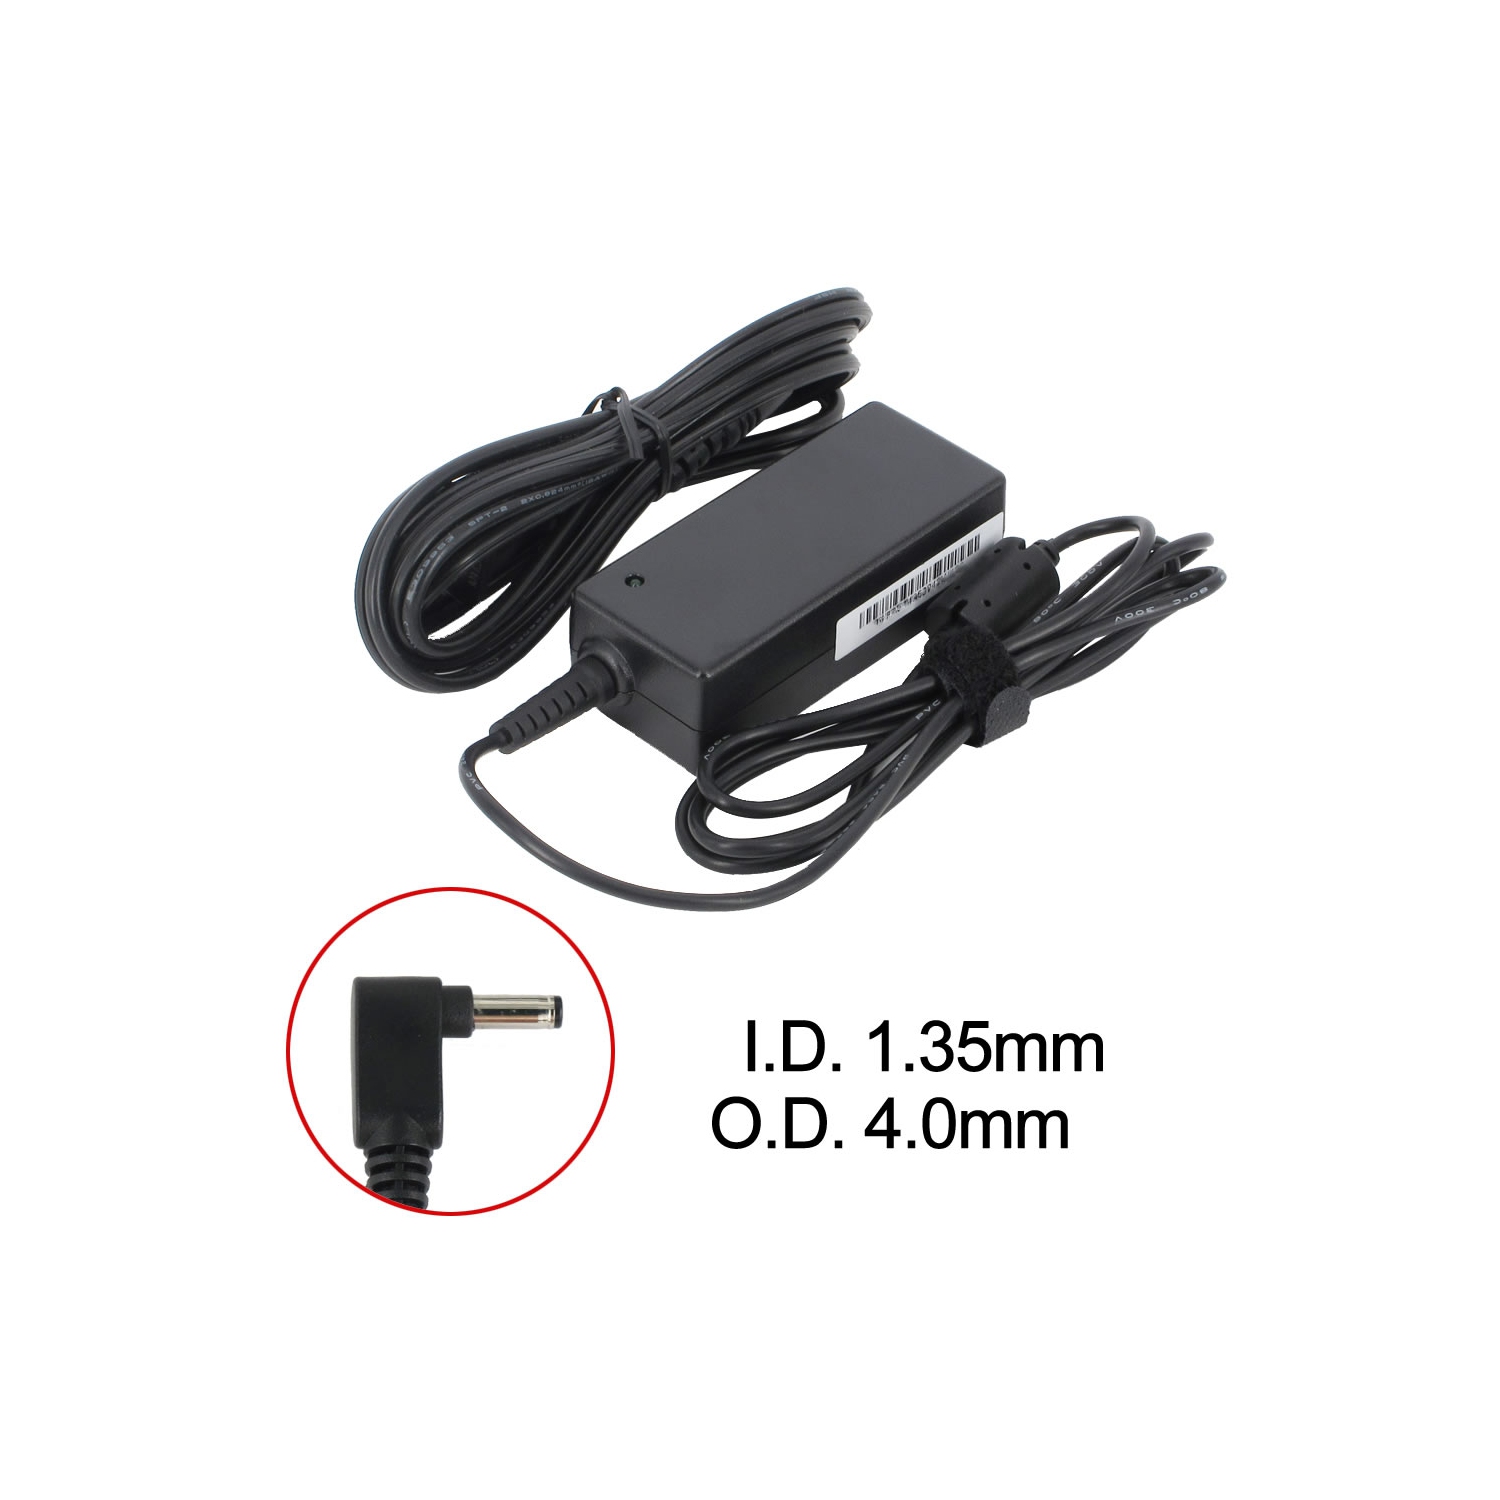 BattDepot: New Laptop AC Adapter for Asus UX305UA-1C, 0A001-00230300, 0A001-00233100, EXA1206CH, W15-065N1A